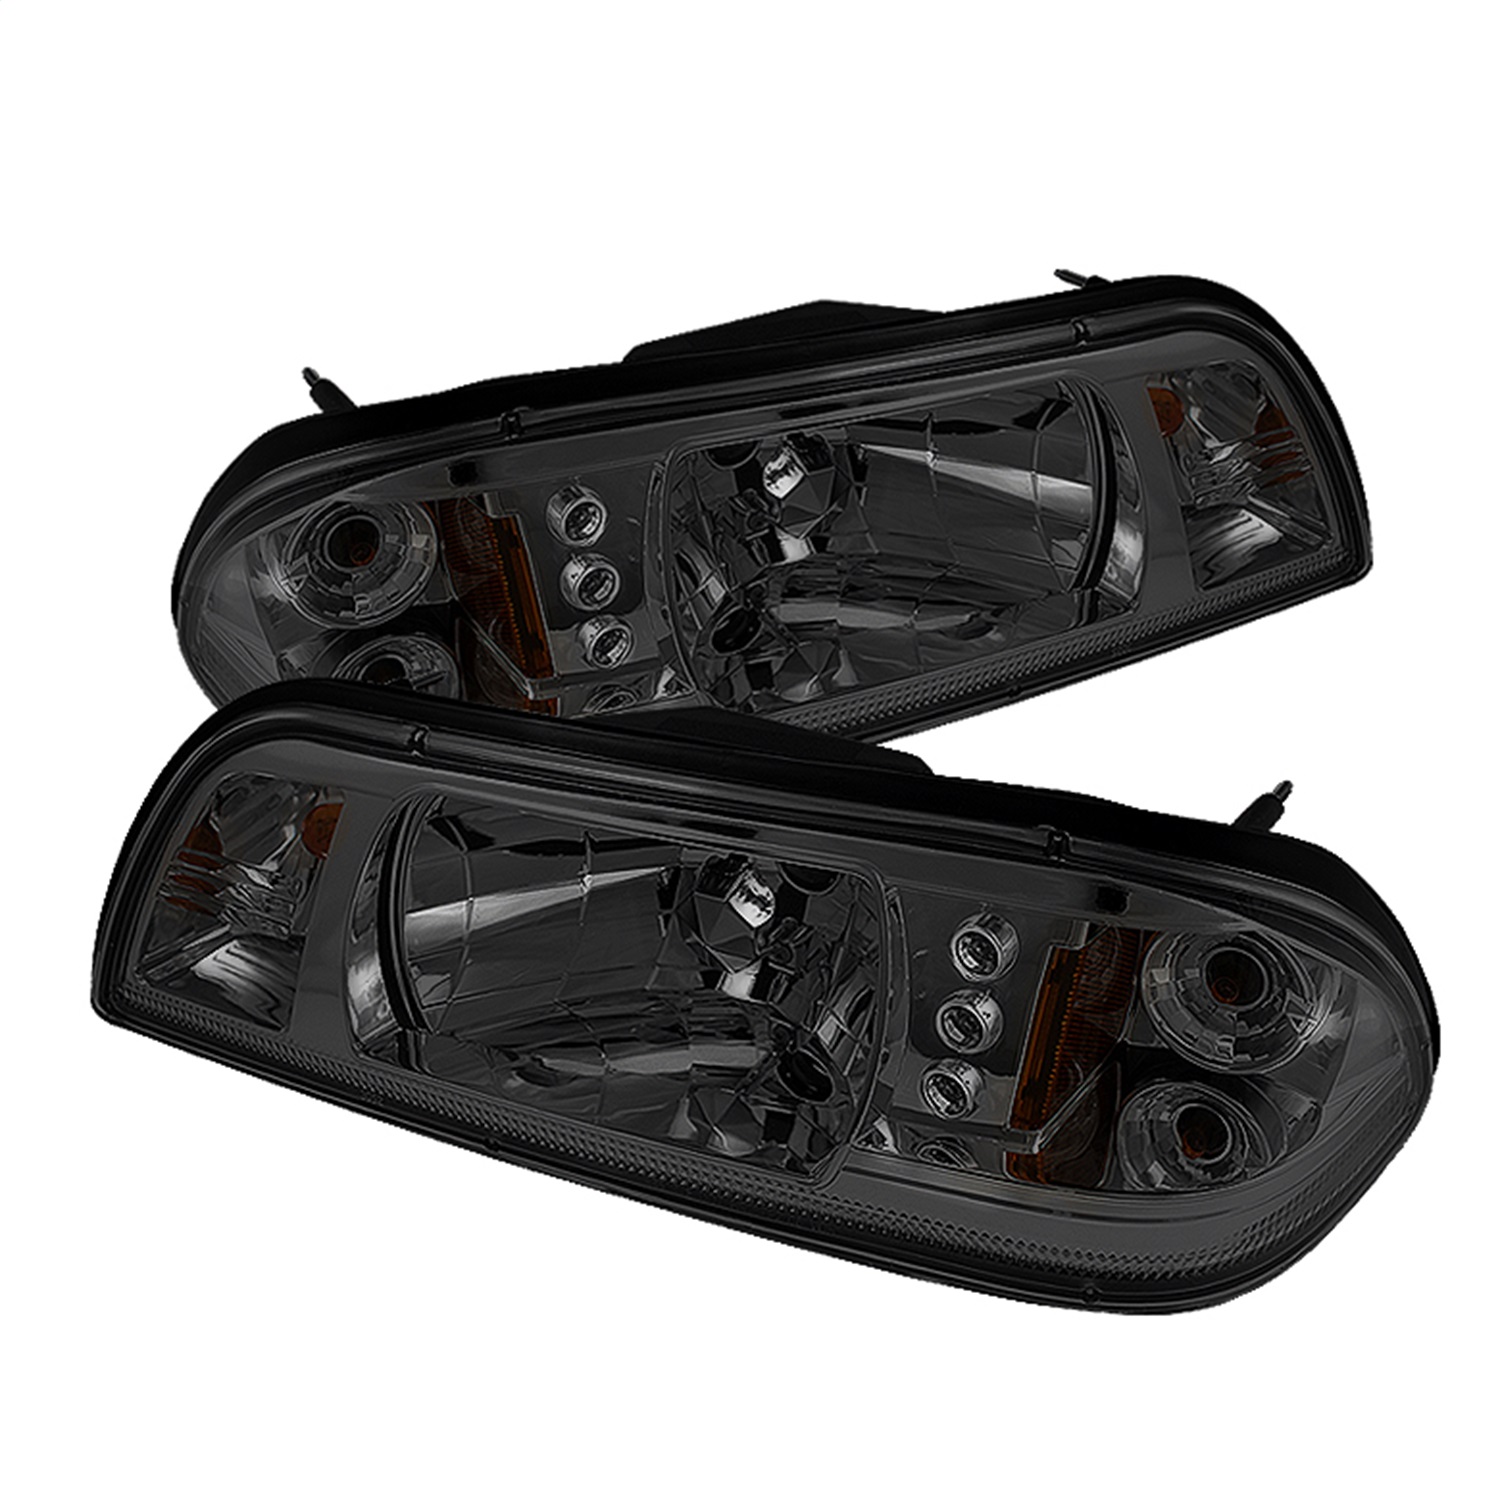 Spyder Auto 5016805 LED Crystal Headlights Fits 87-93 Mustang